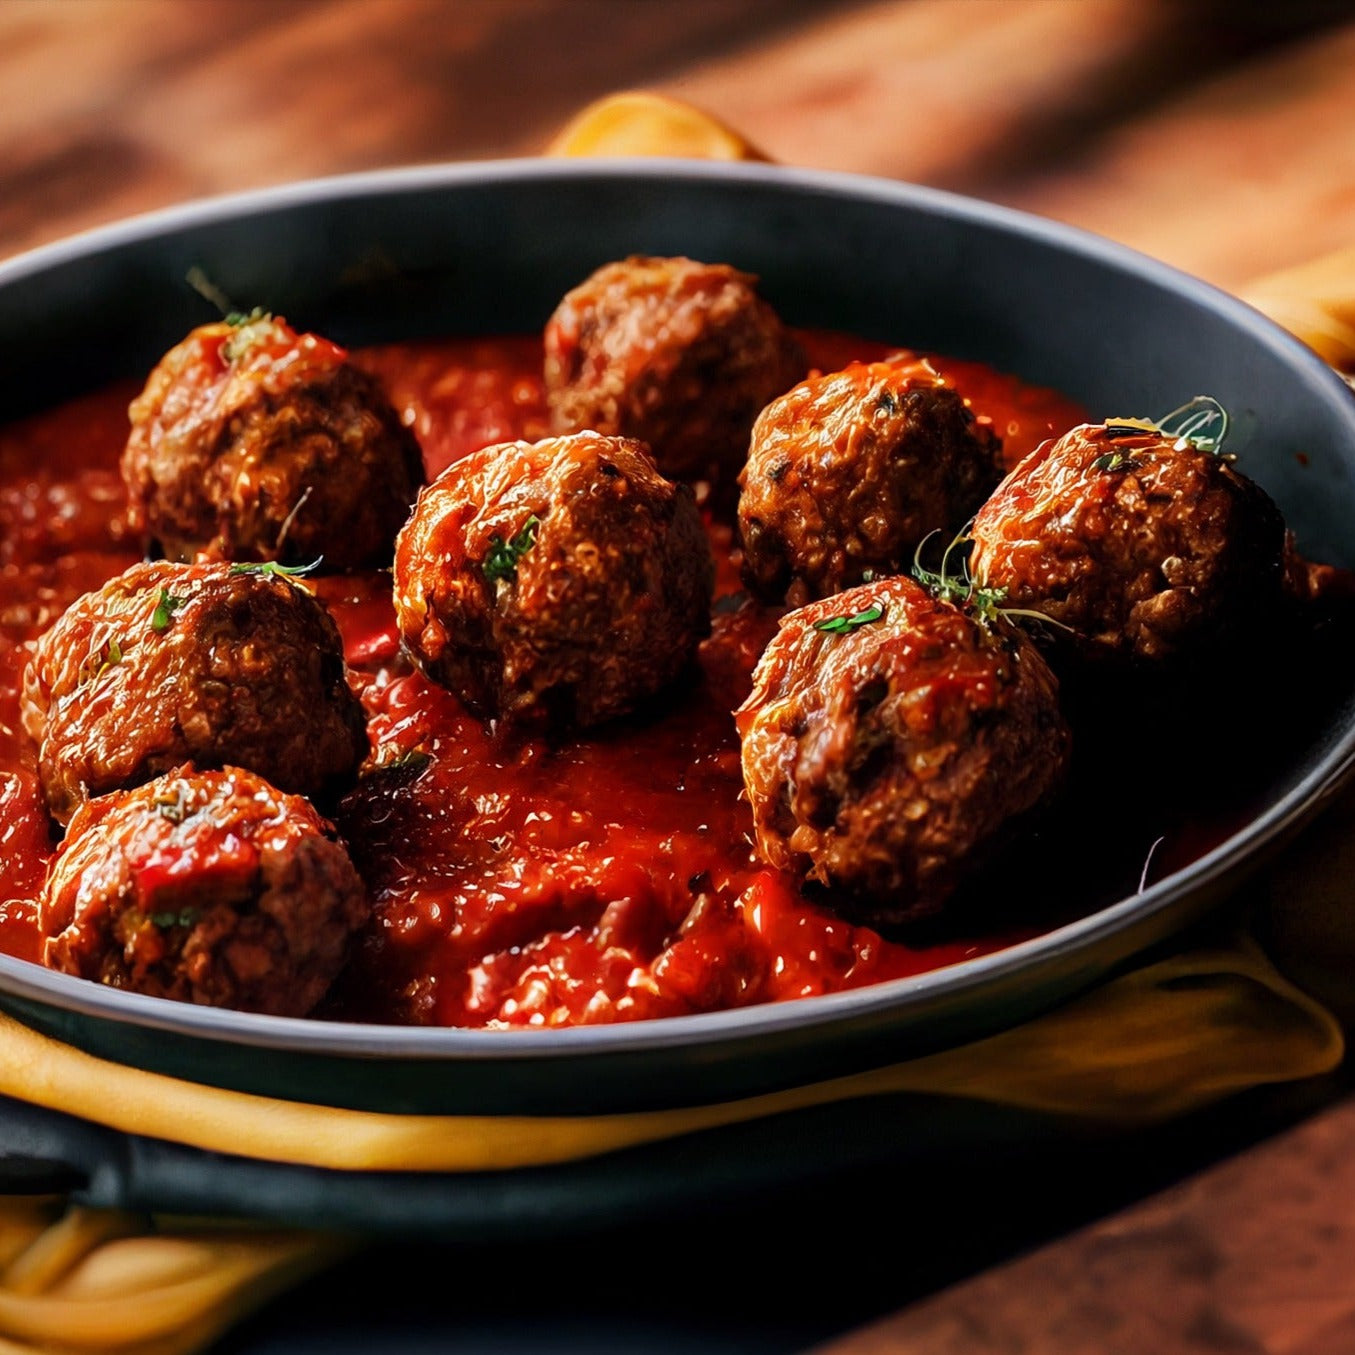 North African Beef Meatballs in Saffron Tomato Sauce w/Optional Side of Sorghum